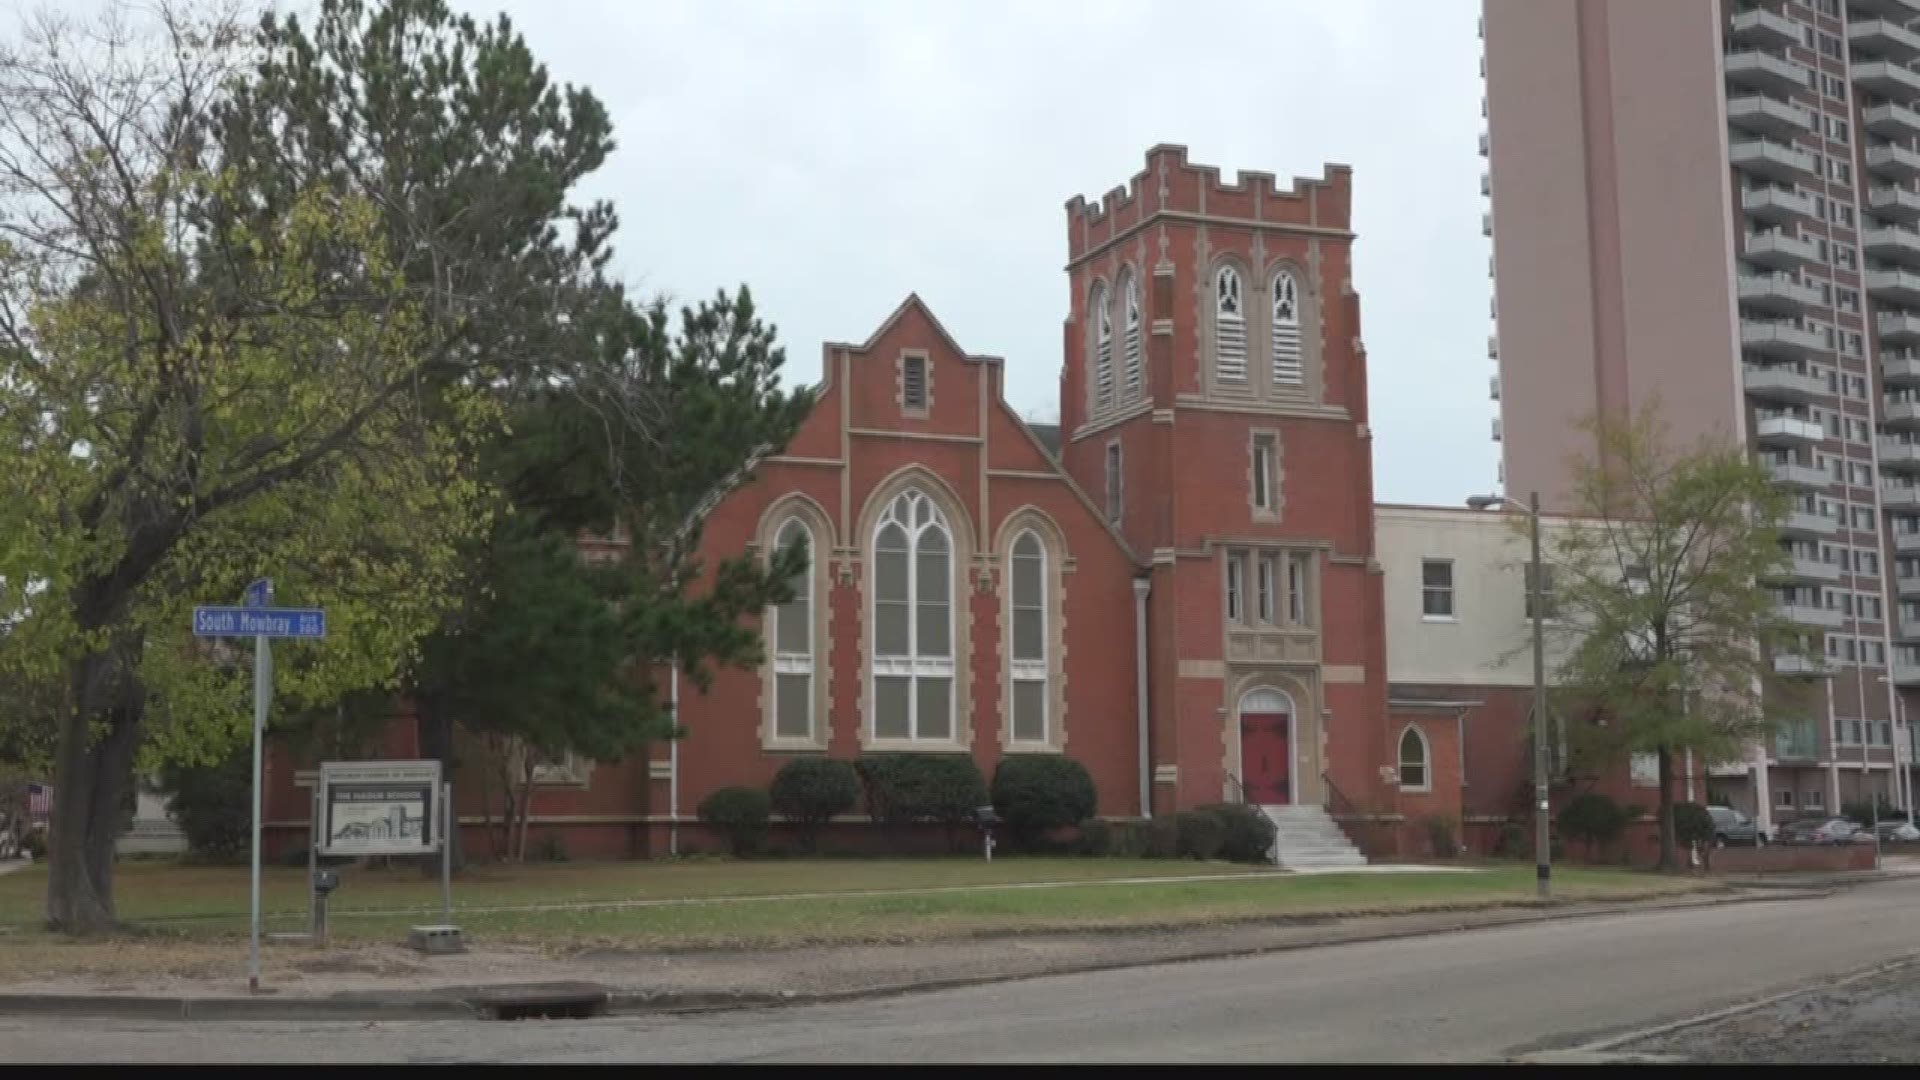 A new private high school wants to move into a historic Unitarian church in Norfolk.